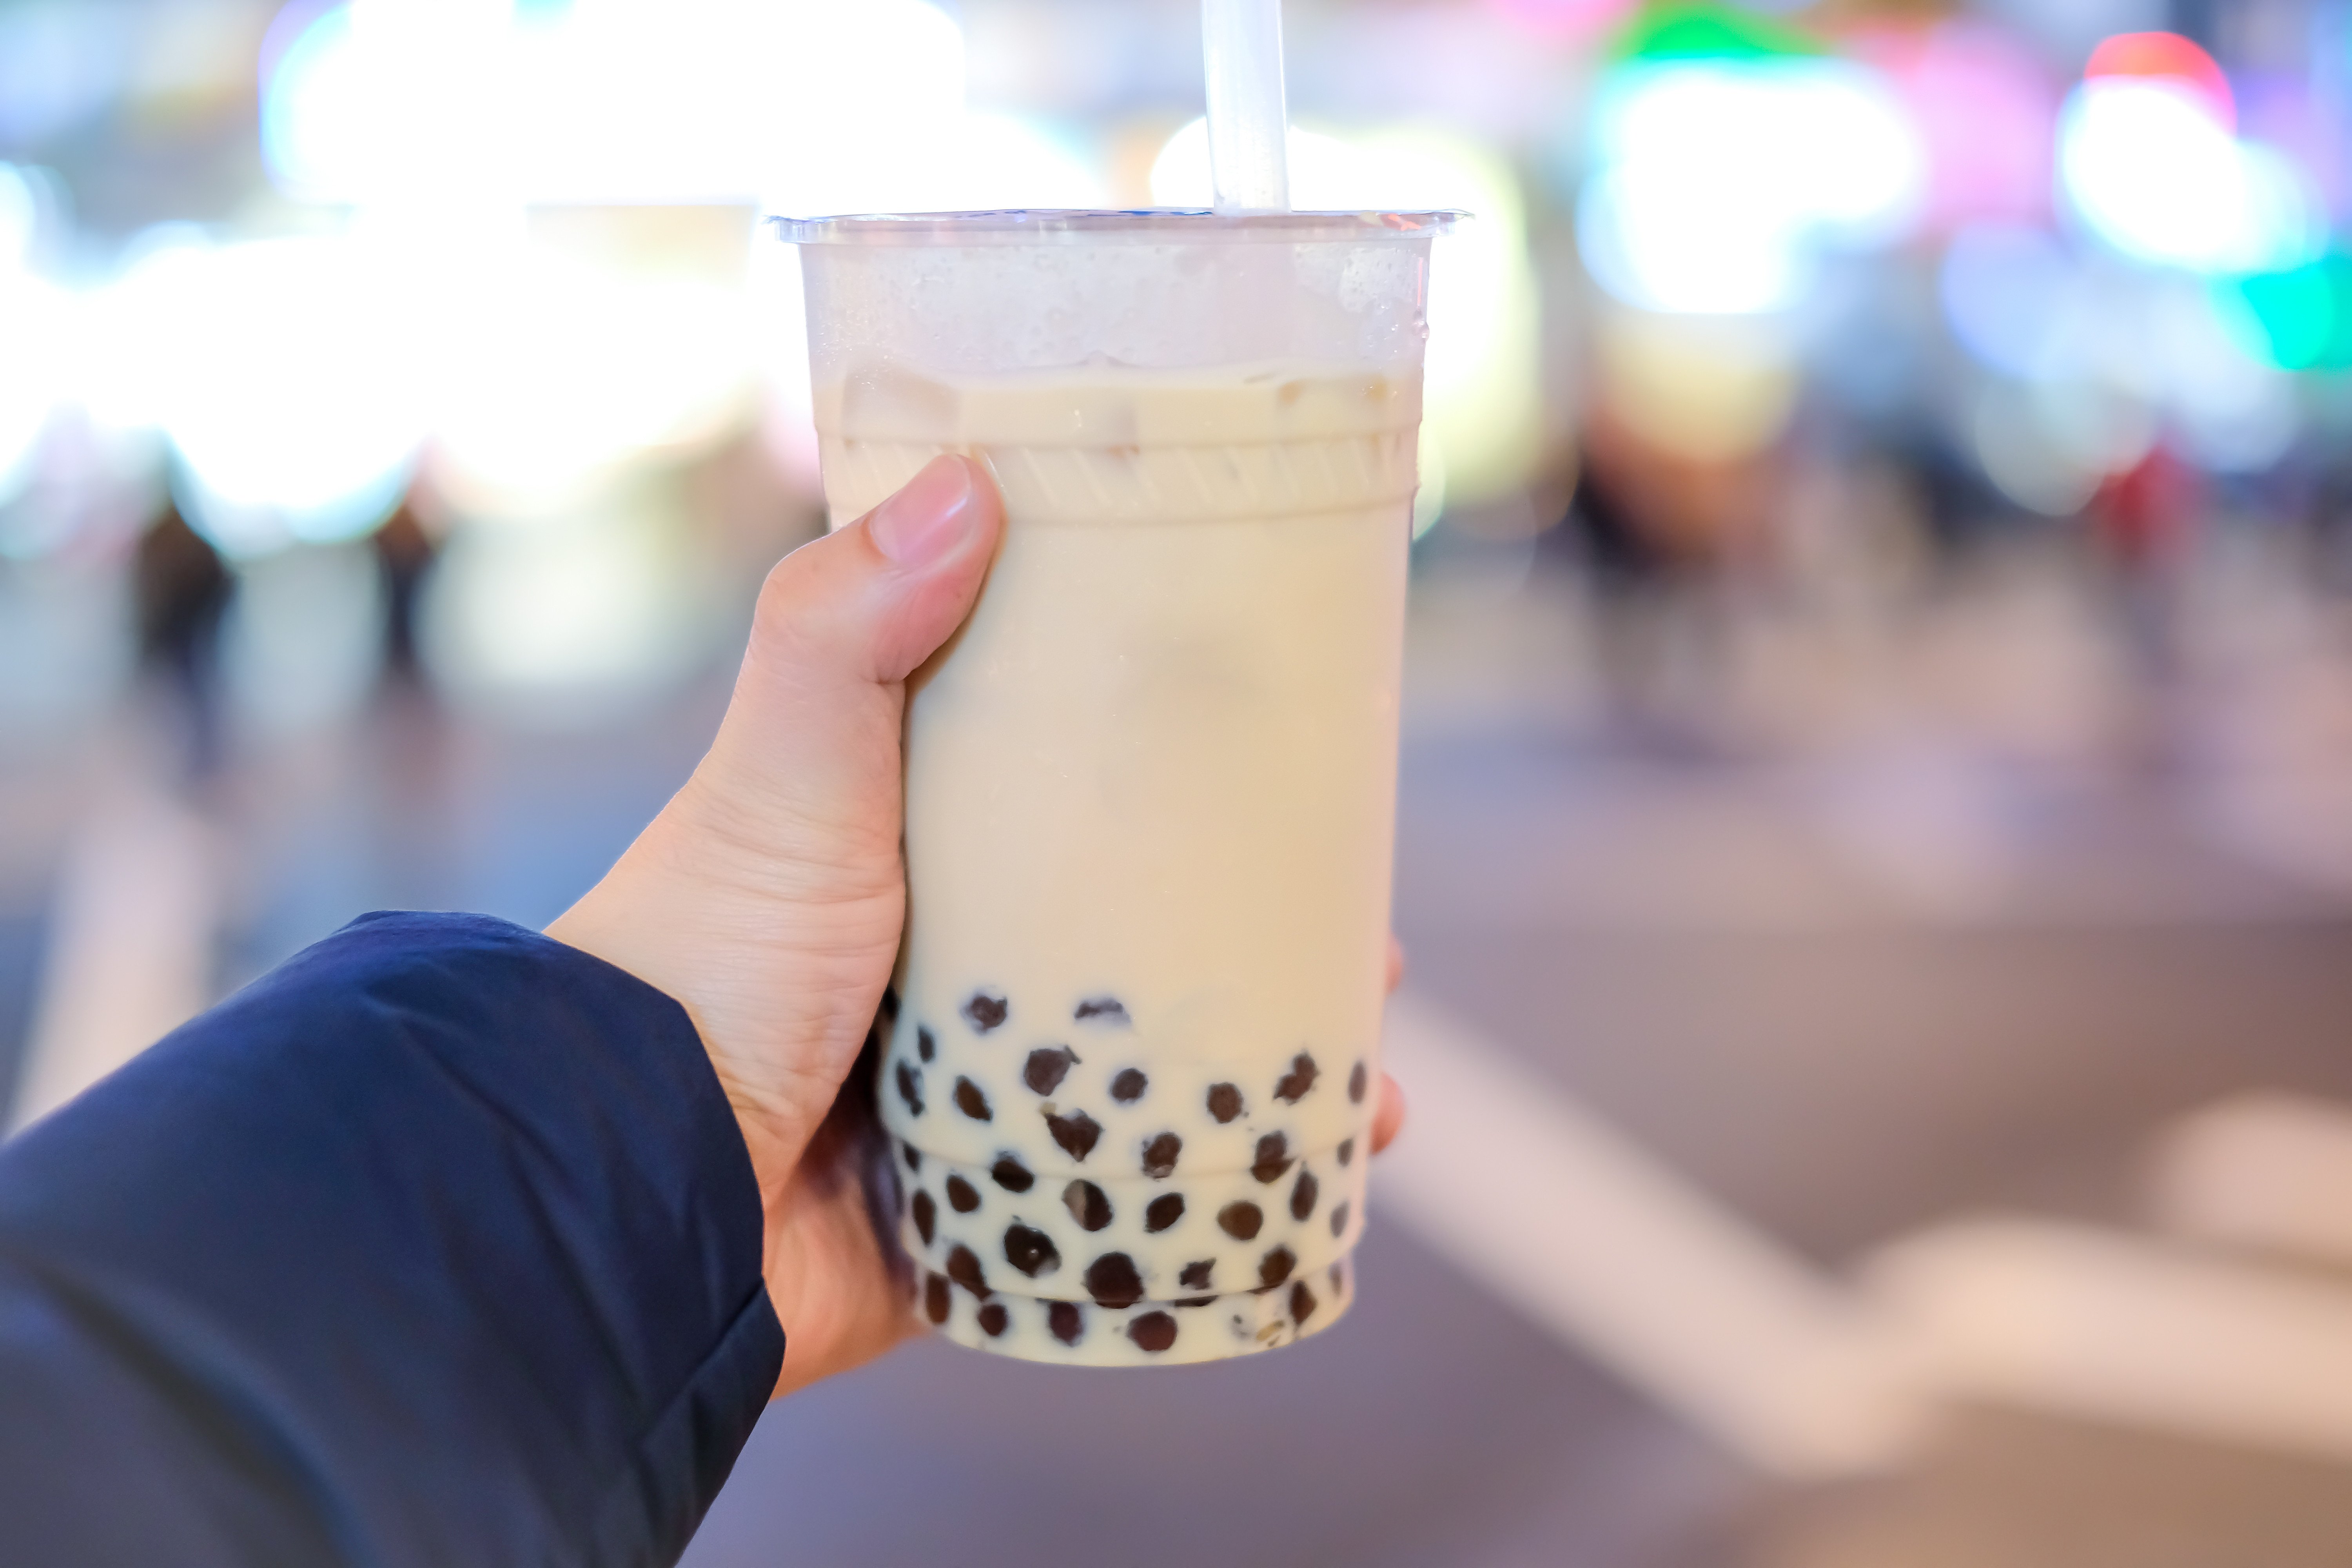 Bad news for US bubble tea lovers: the shortage is likely to last until the end of April at earliest. Photo: Shutterstock